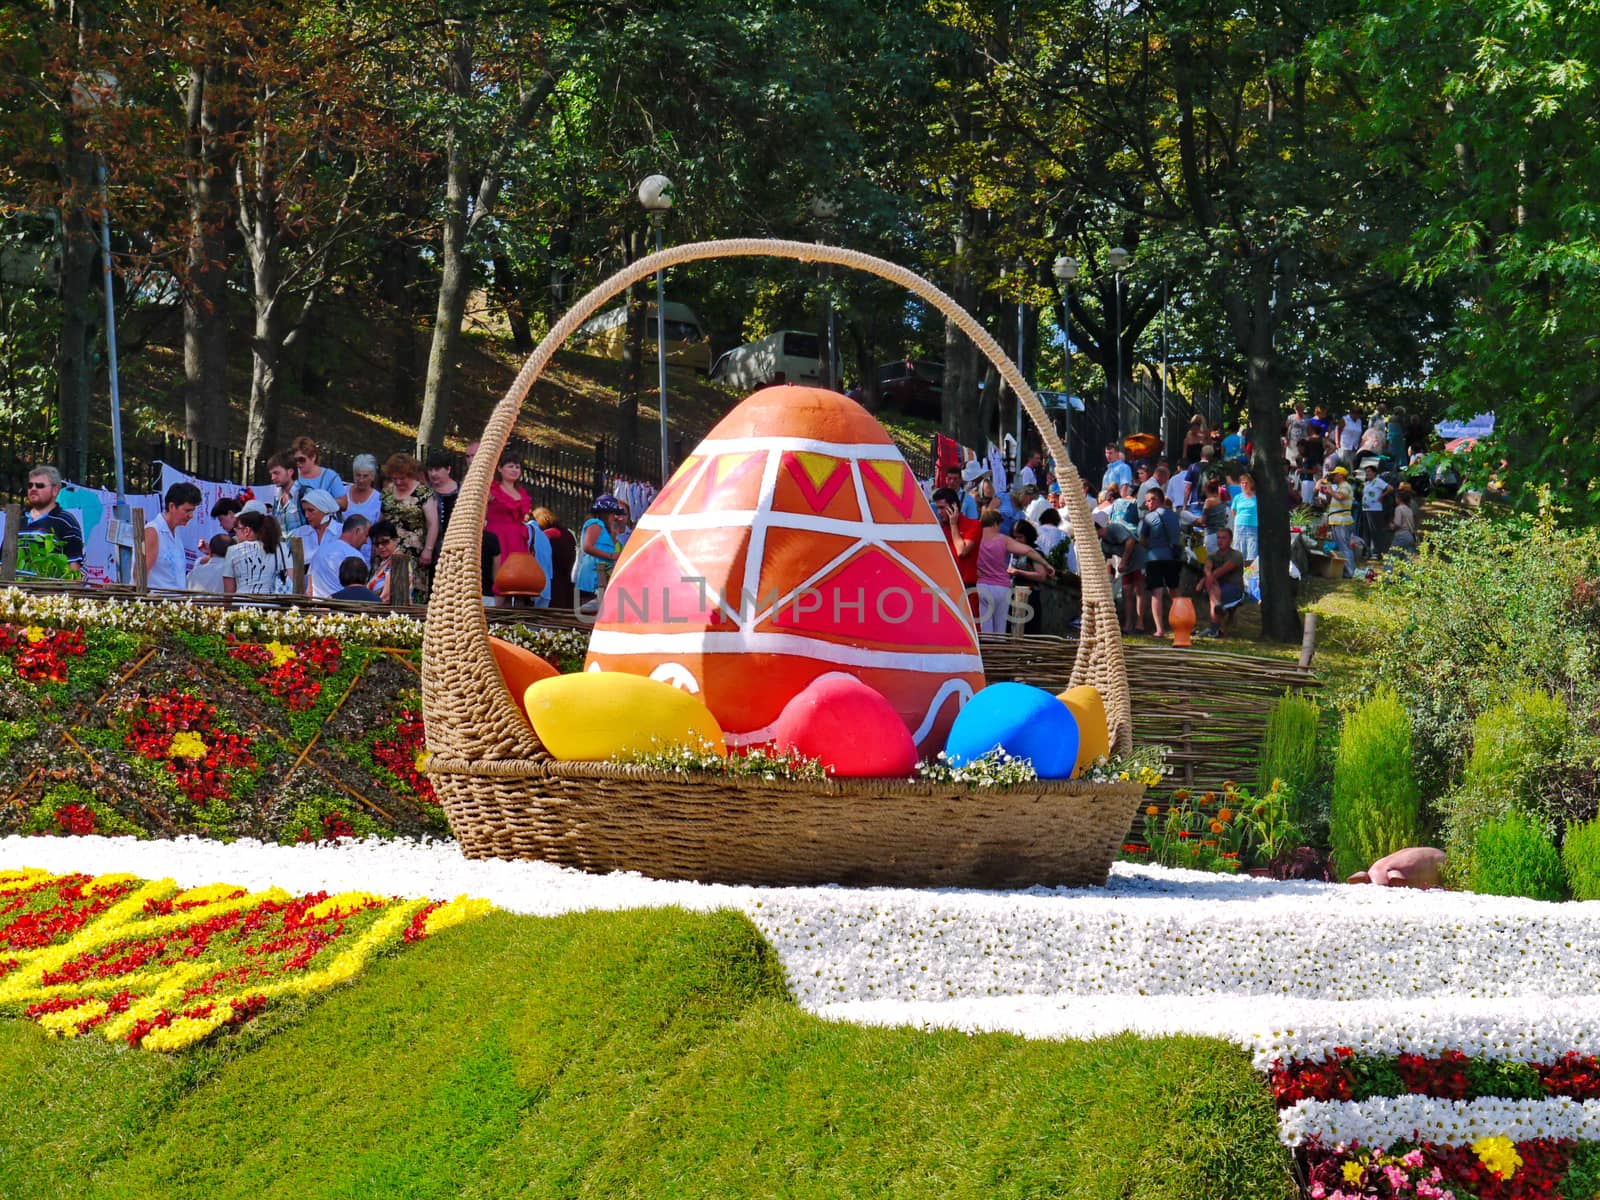 Exhibition is a summer sunny day in the park. A large wicker basket with a painted egg standing on a white veil of flowers and people looking at this beauty.